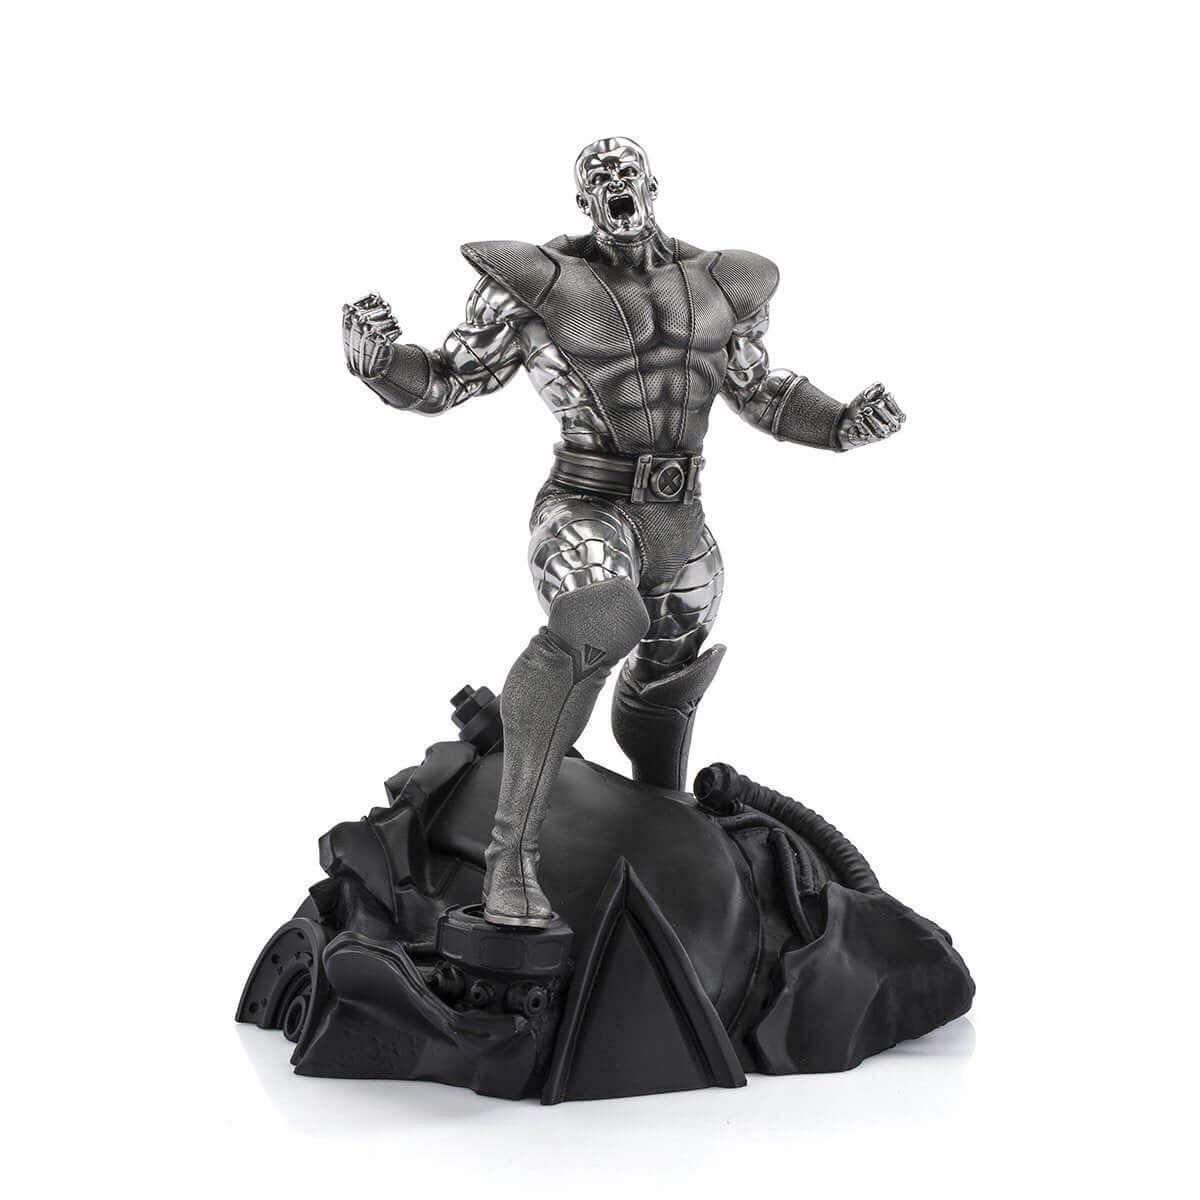 Colossus Victorious Limited Edition Figurine - Marvel Statue